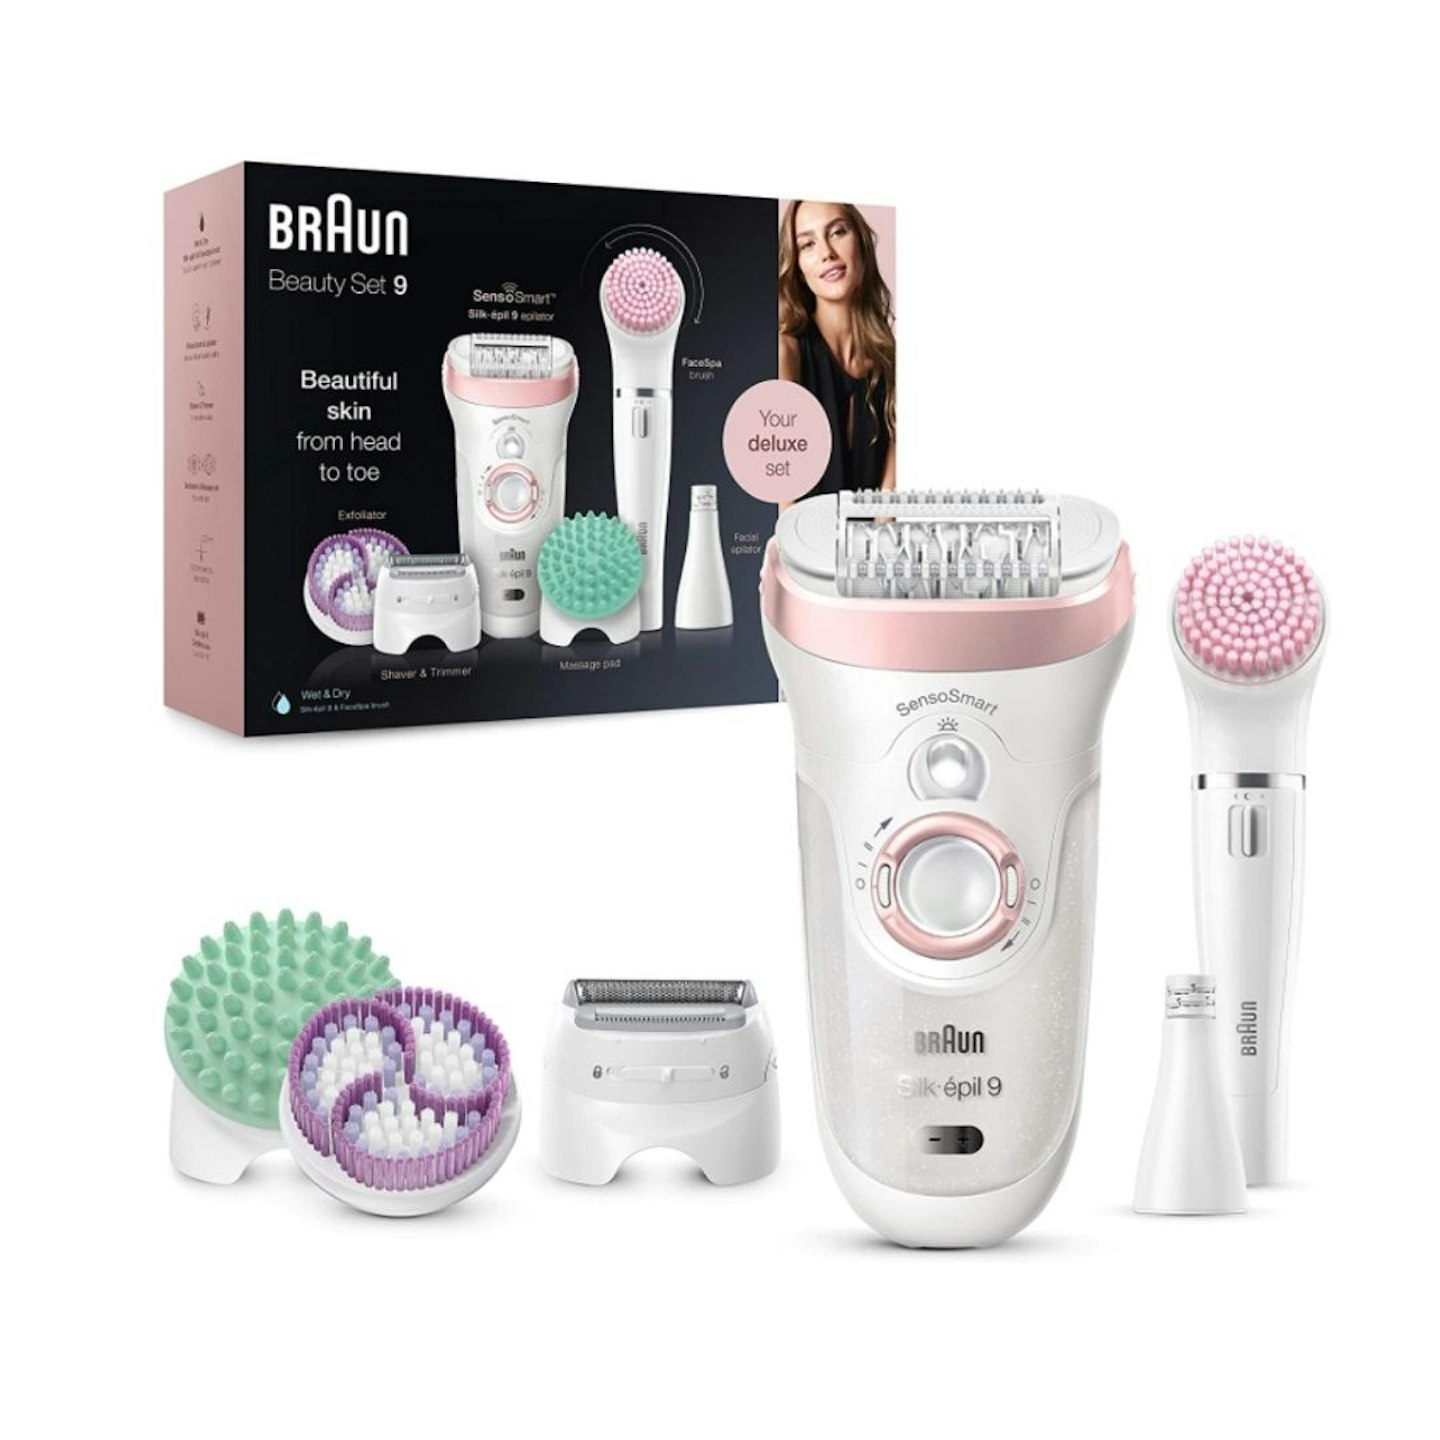 Braun Beauty Set, Epilator for Hair Removal, 7 In 1, Includes Lady Shaver, Face Epilator & Exfoliator, Gifts for Women, UK 2 Pin Plug, 9-985, White/Pink